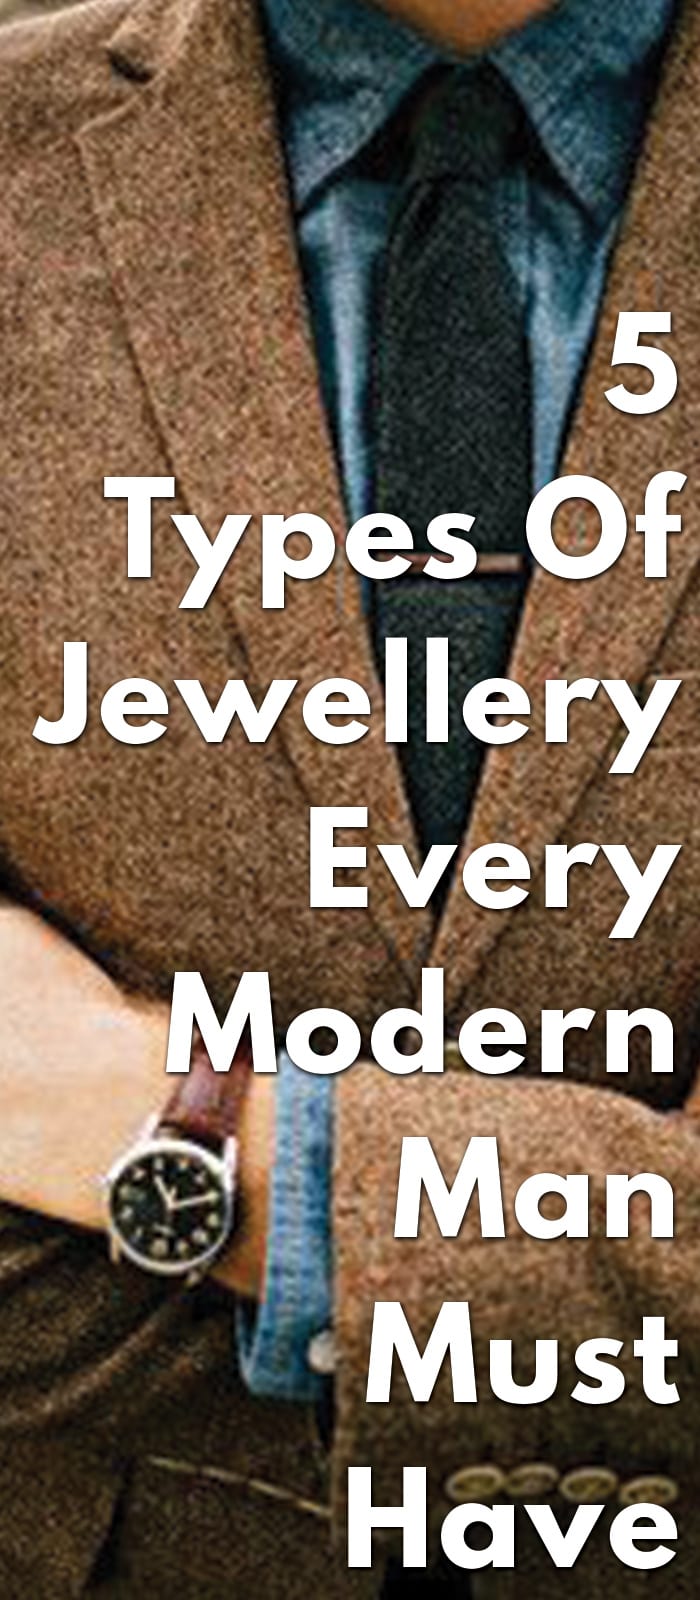 5-Types-Of-Jewellery-Every-Modern-Man-Must-Have